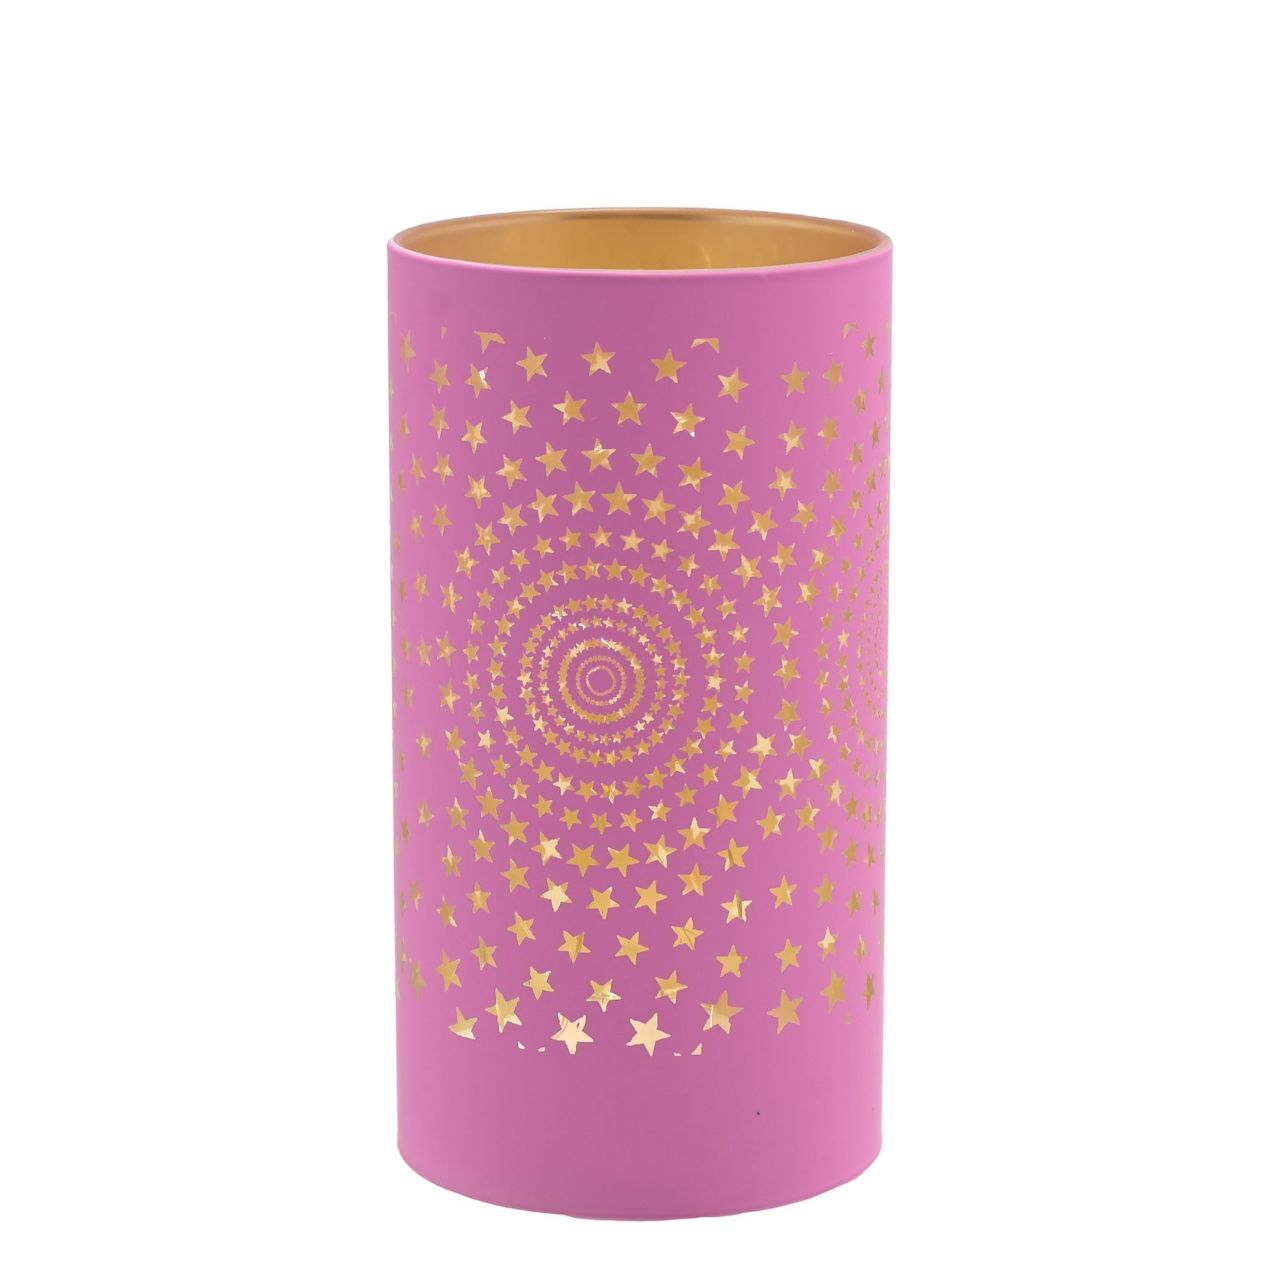 Christmas Pink Starburst LED Light Tube  A pink starburst LED tube light.  This illuminating light makes a delightful twist on the traditional this Christmas.